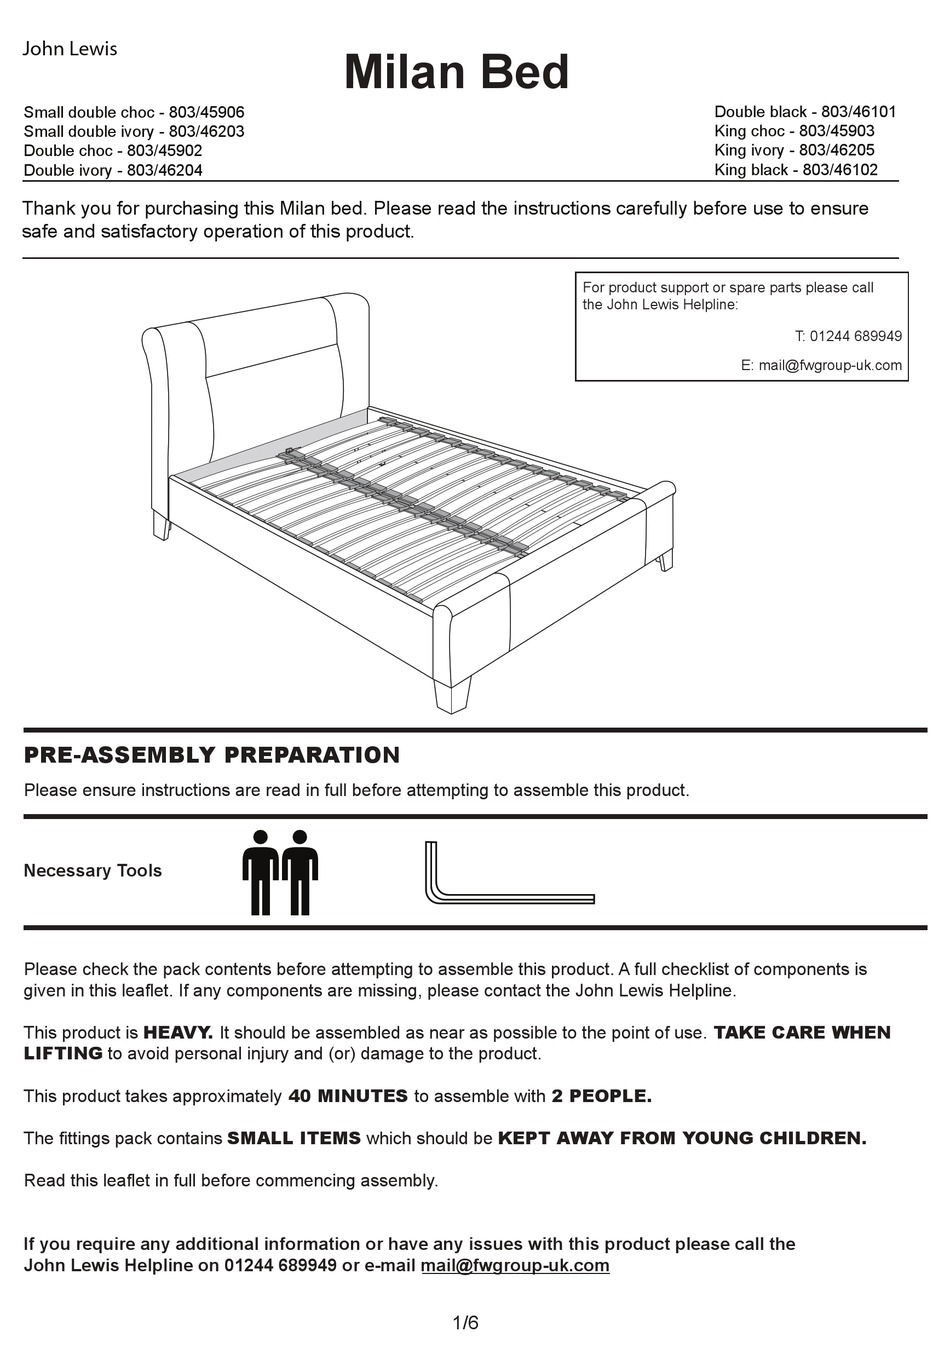 John Lewis 803 46203 Assembly Manual, King Bed Frame Assembly Instructions